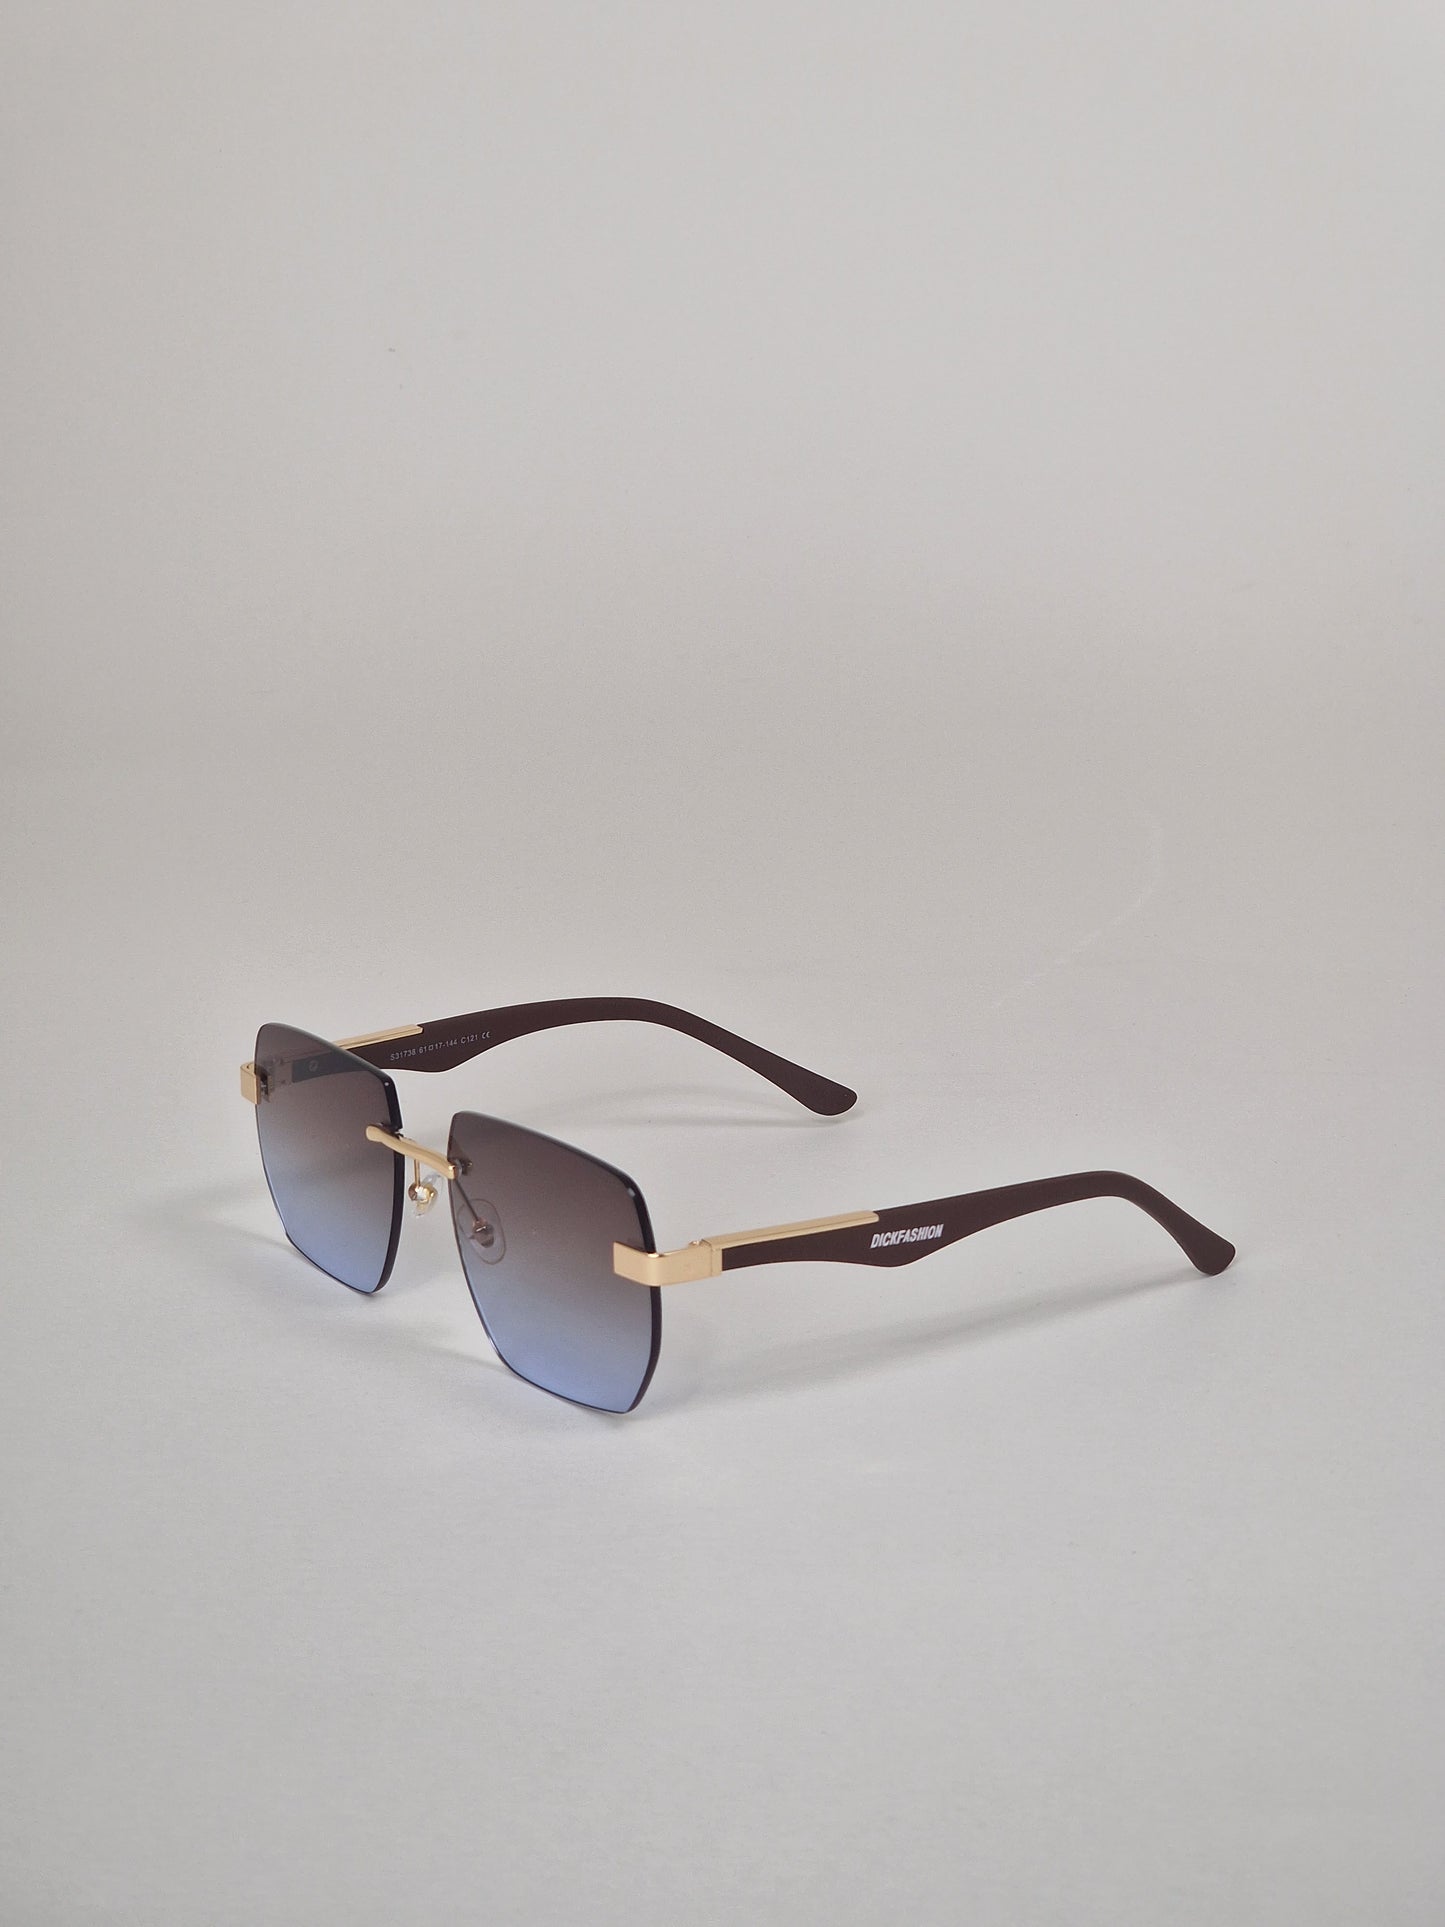 Sunglasses, model 4 - Brown/blue Tinted.